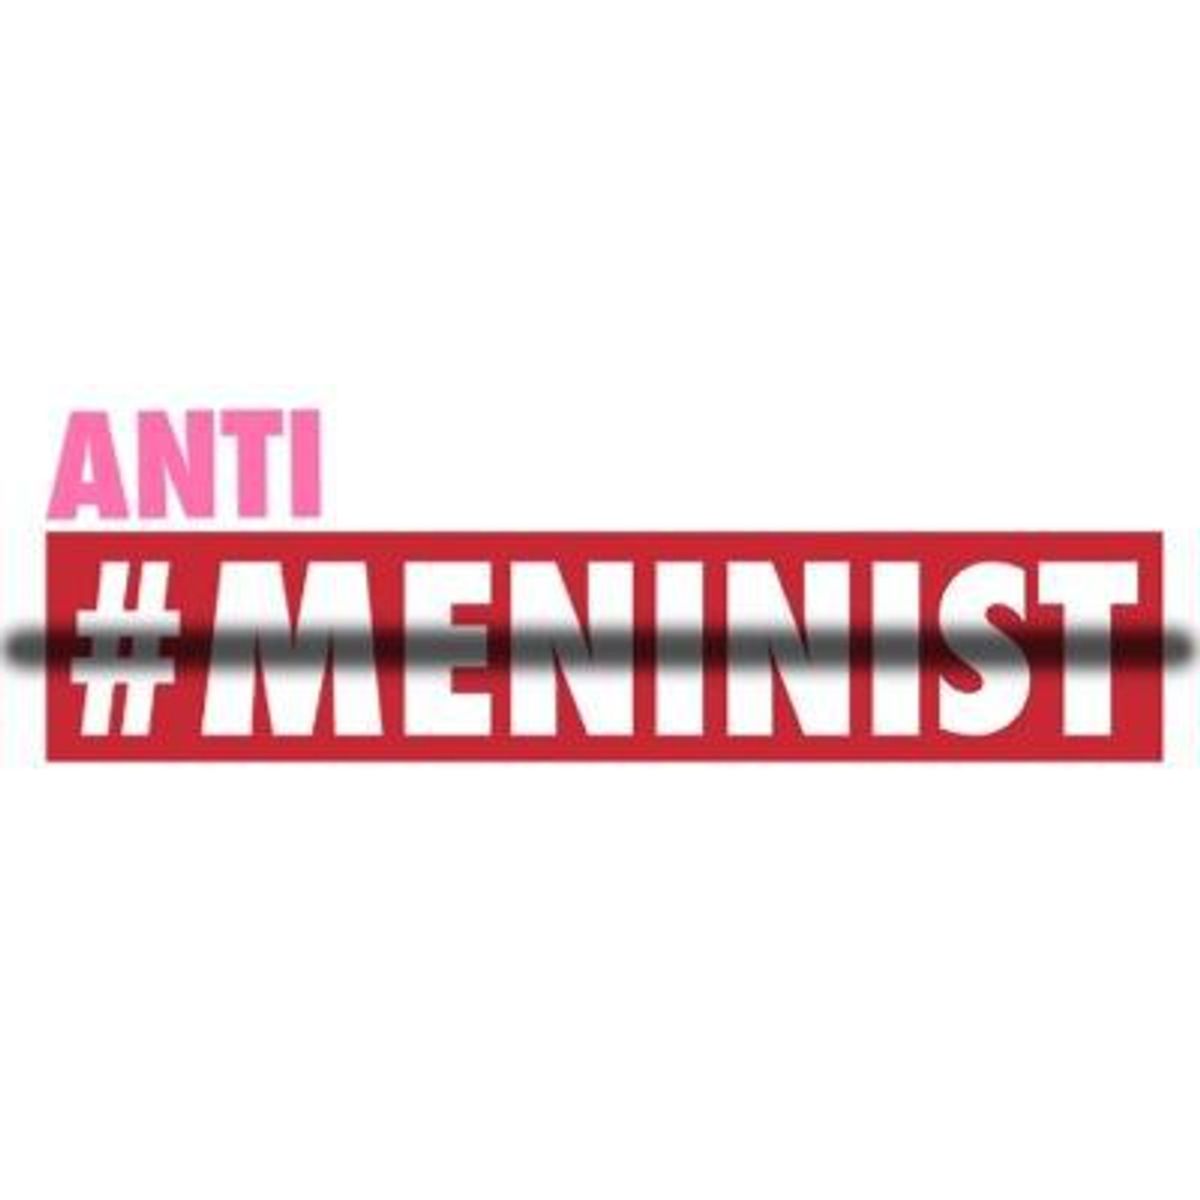 What Is "Meninism" And Why Is It So Problematic?